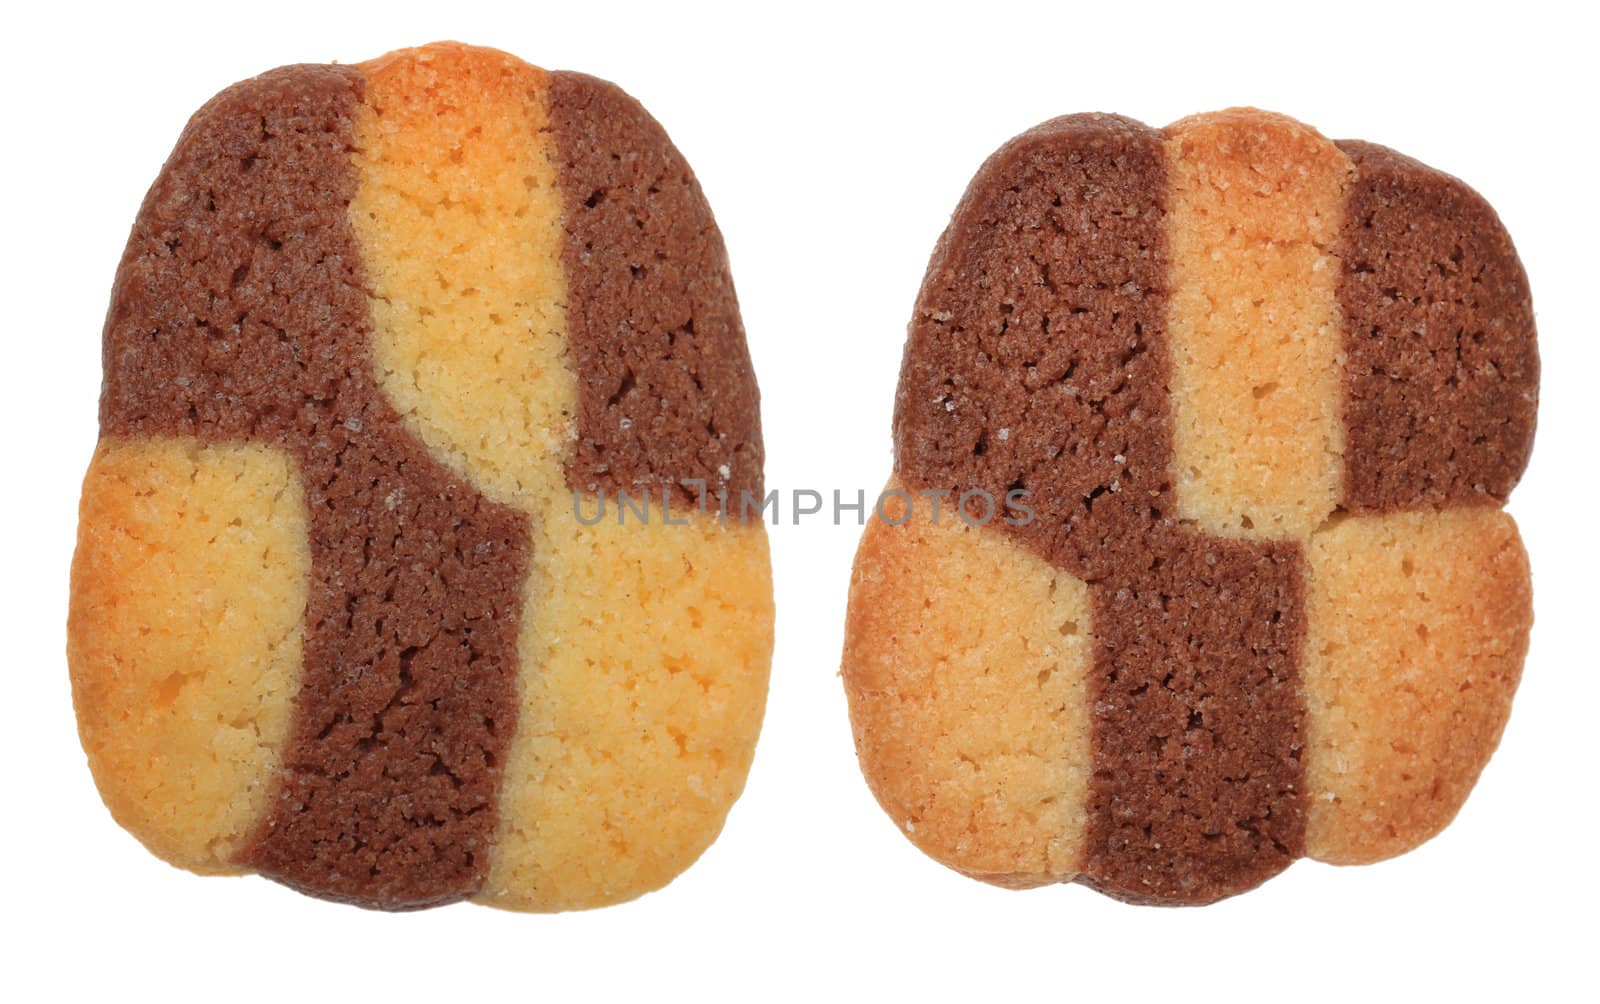 Two tasty biscuits isolated against a white background.
